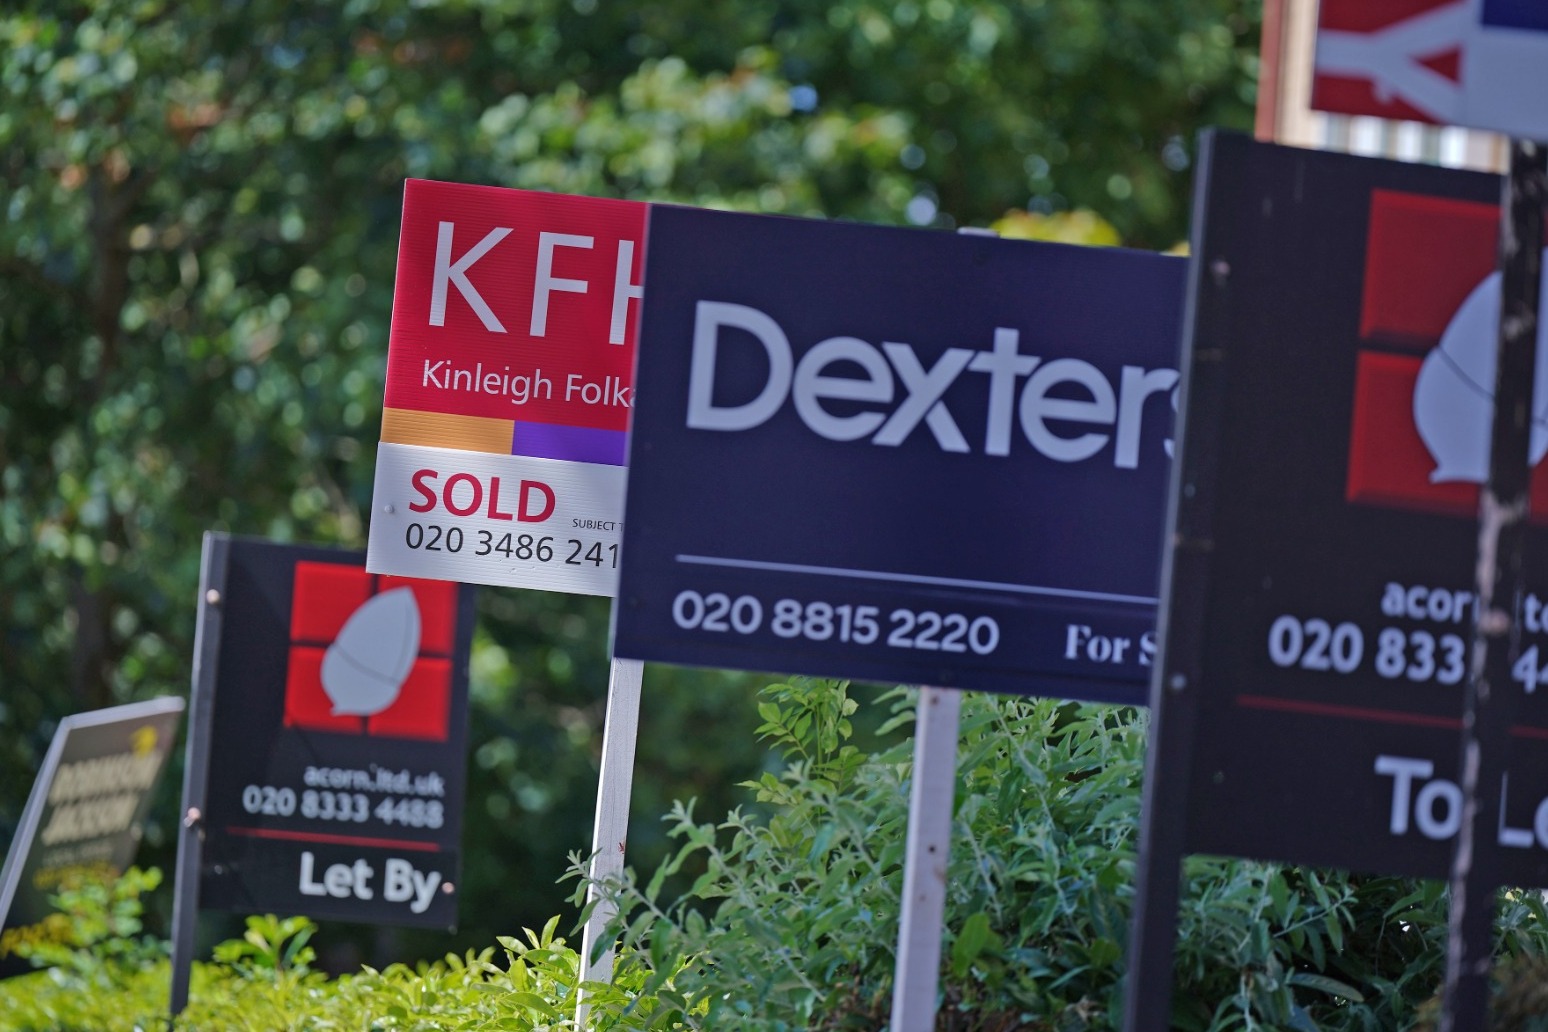 Average UK house price fell by 0.2% month on month in March 